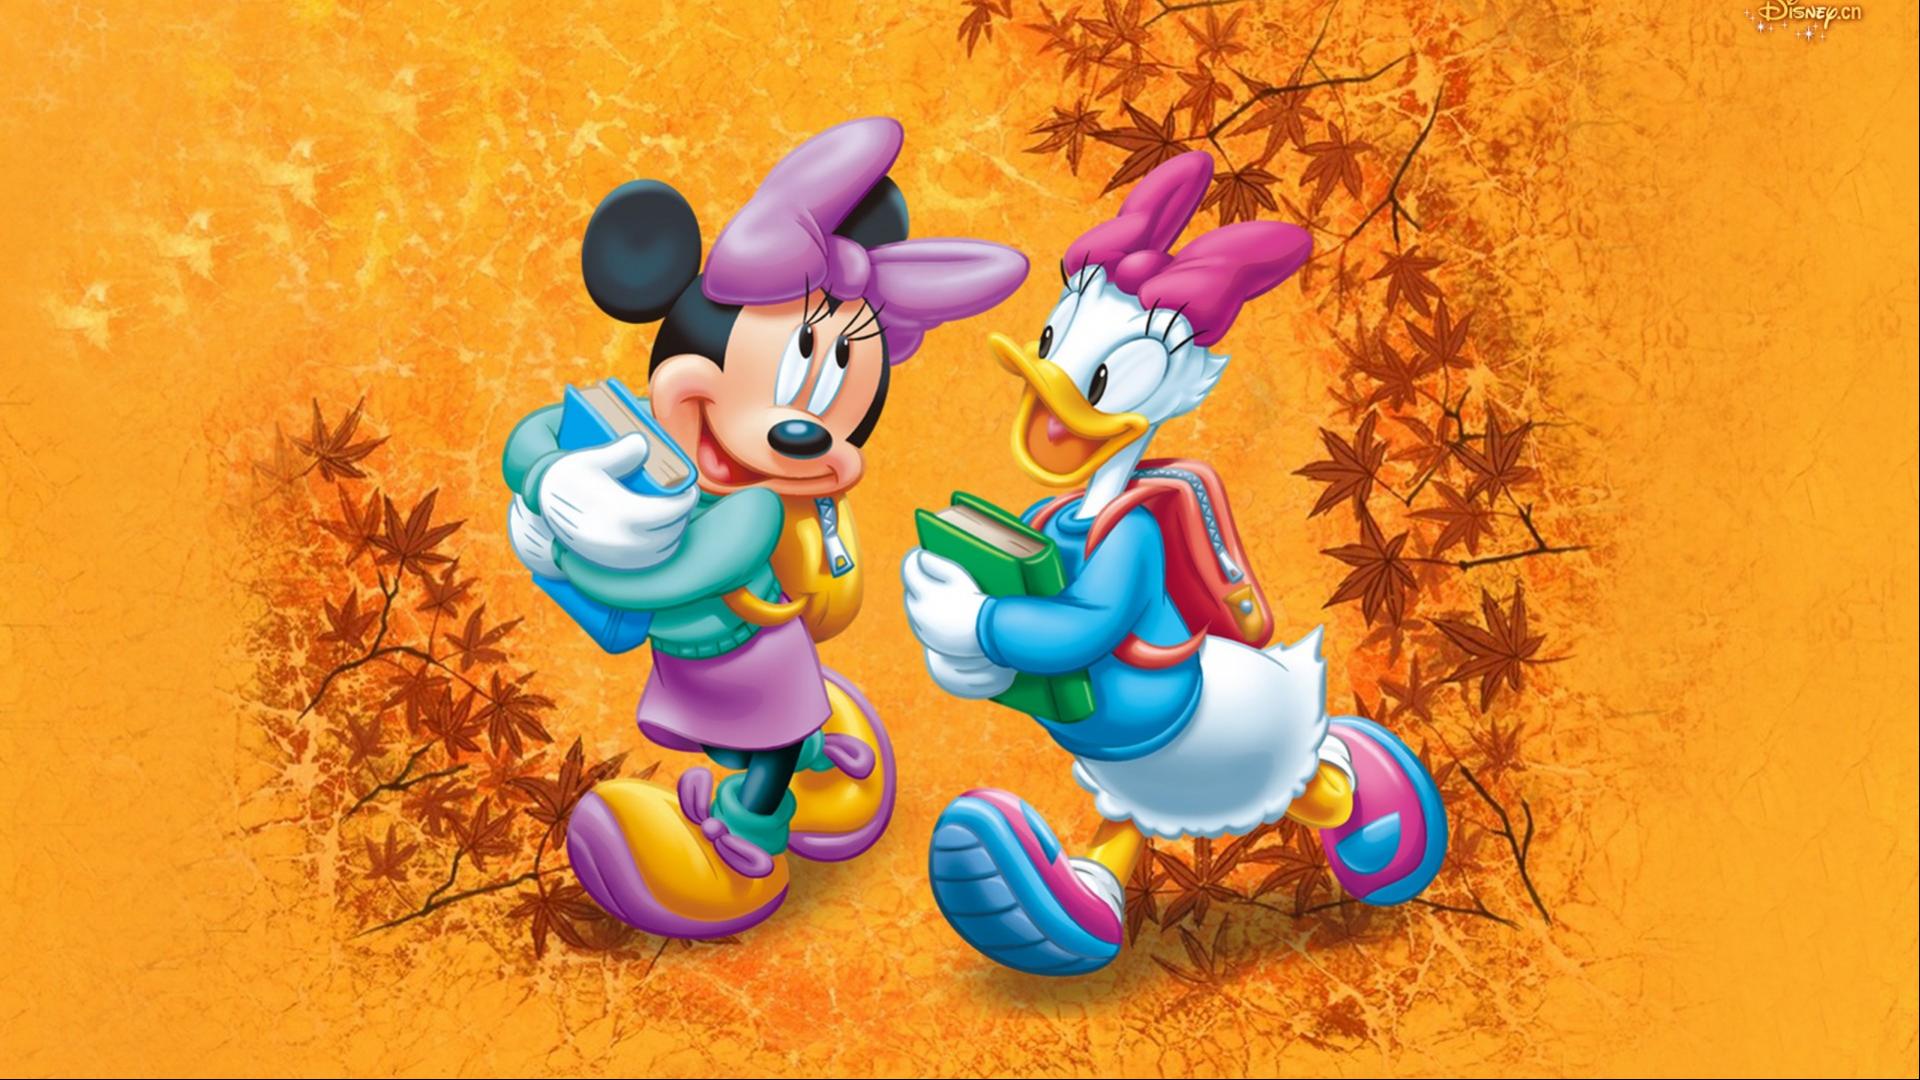 Mickey Mouse Autumn Wallpaper Mouse and Daisy Duck Wallpaper. Wallpaper Download. High Resolution Wallpaper